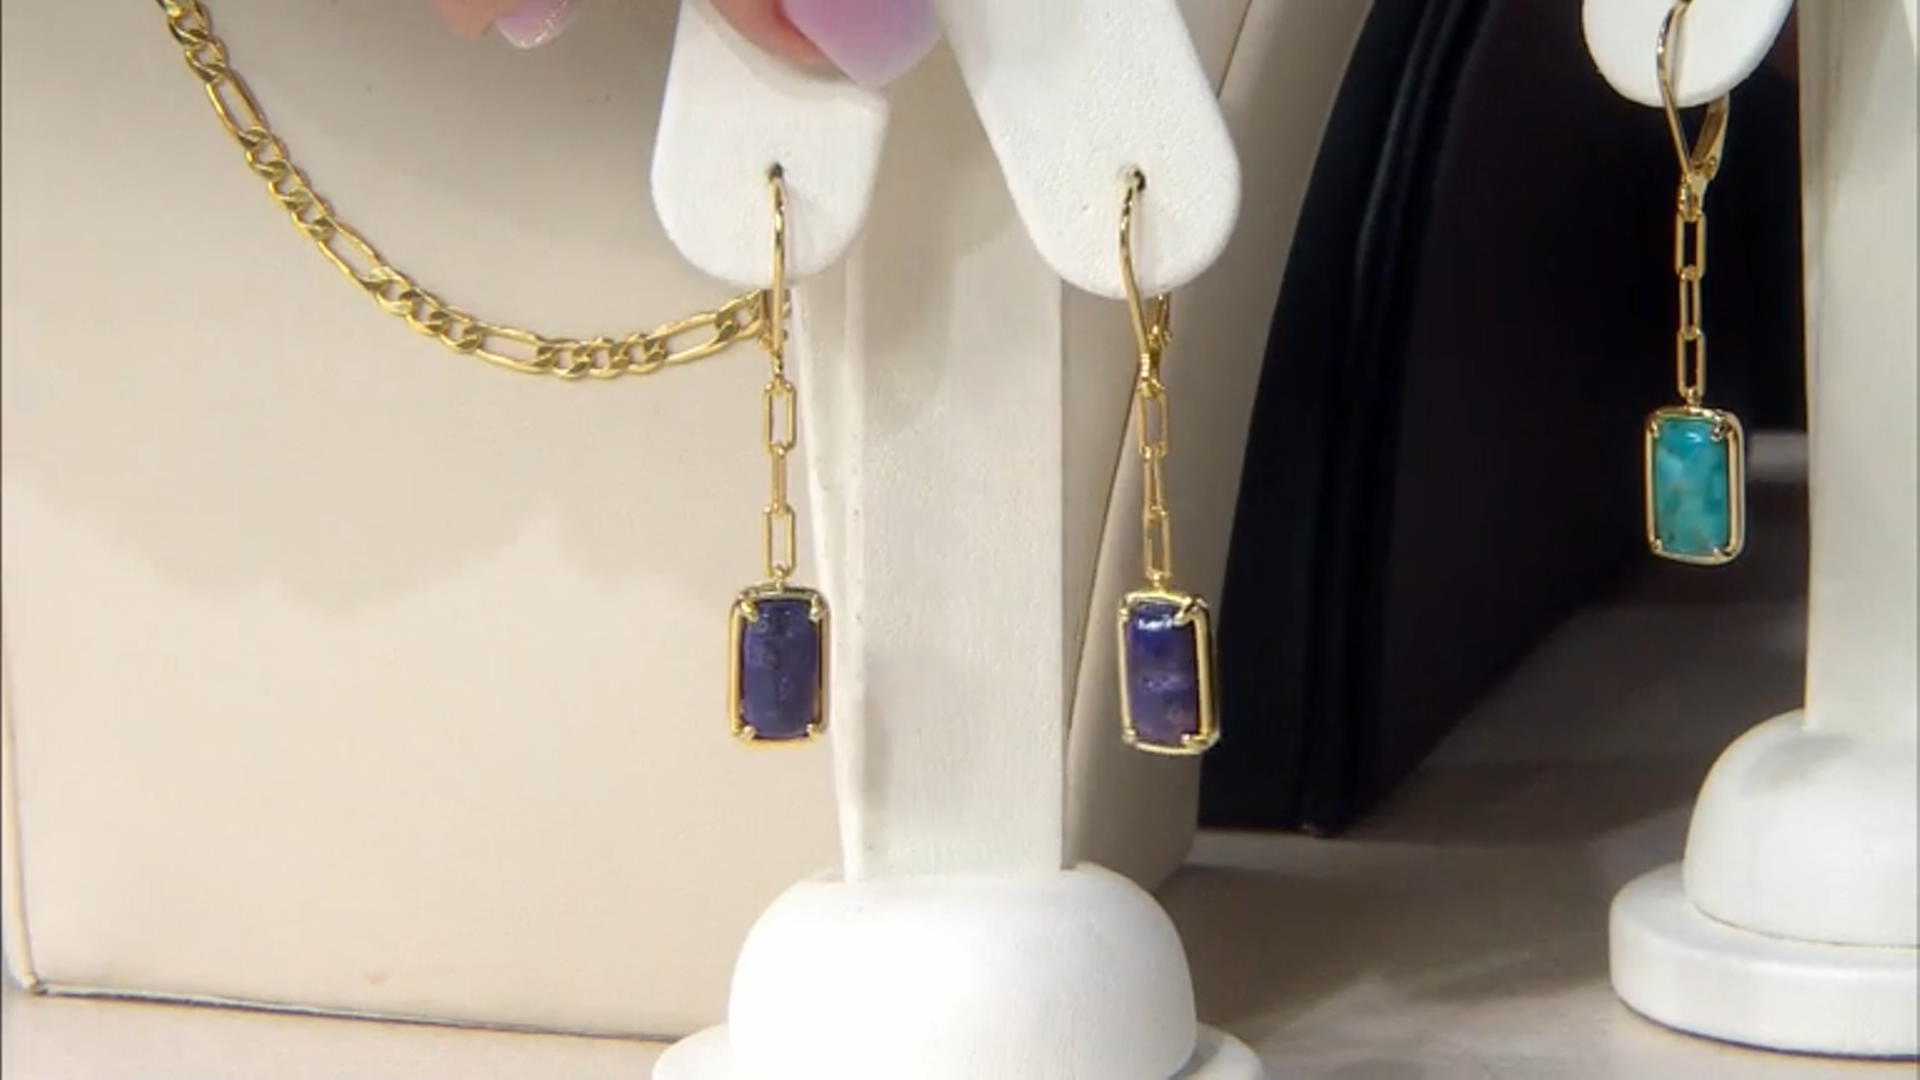 Purple Composite Turquoise 18k Yellow Gold Over Sterling Silver Paperclip Earrings Video Thumbnail